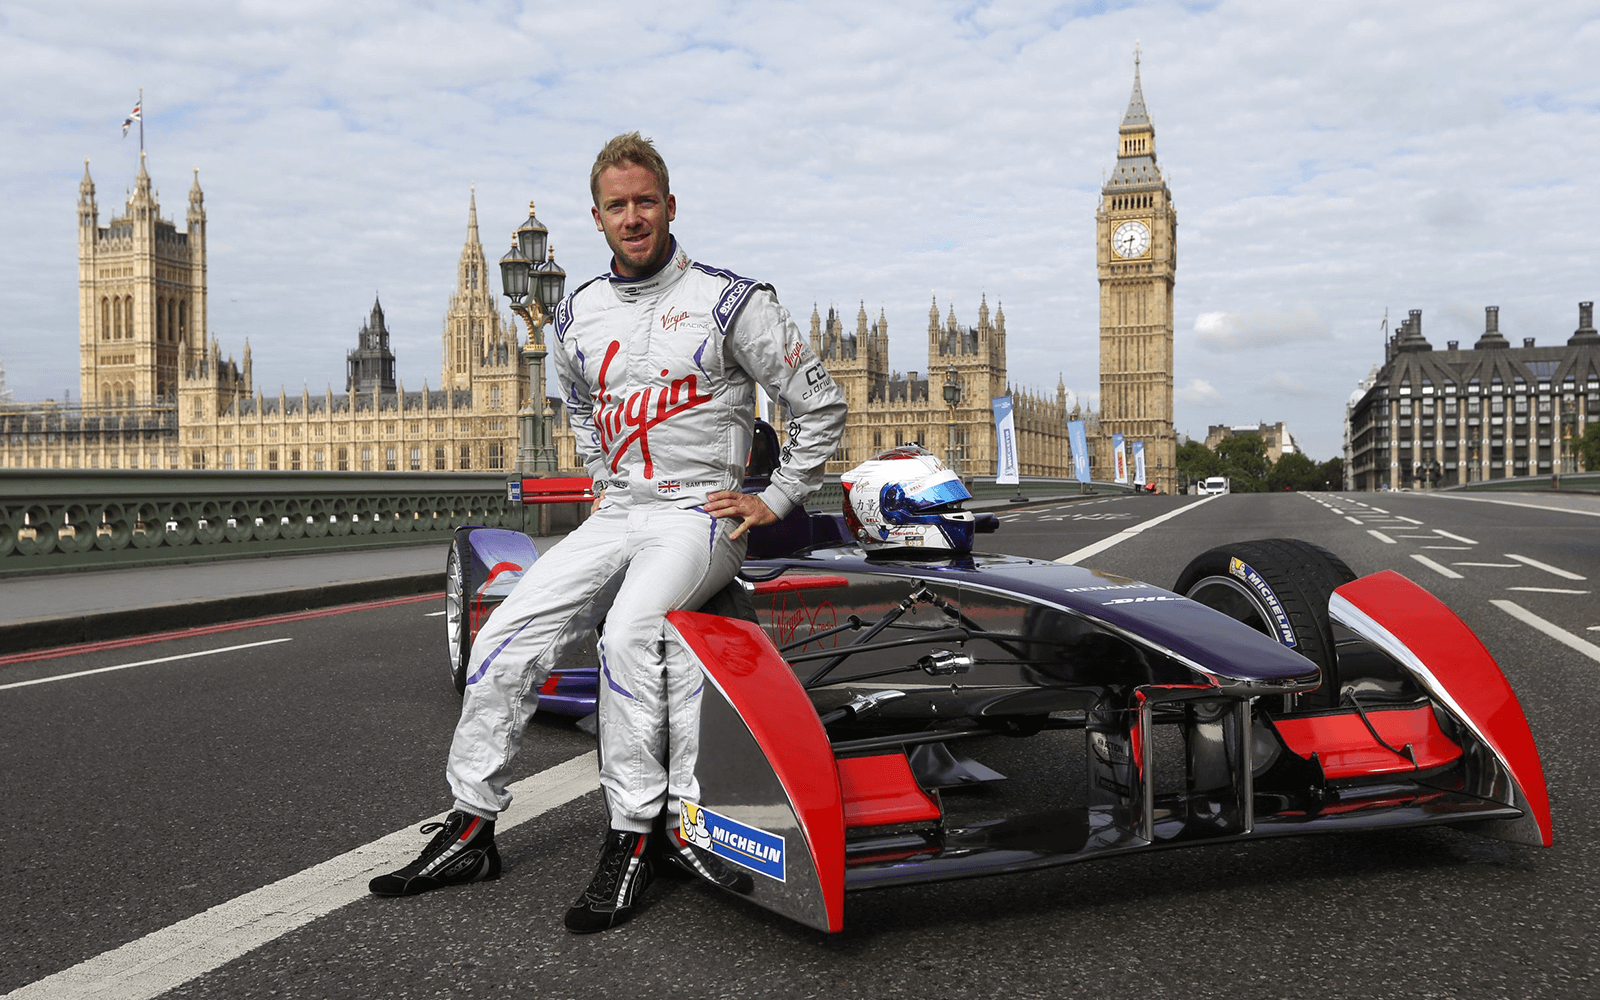 Envision Virgin Racing driver Sam Bird sits on his Formula E car in front of Big Ben and the Palace of Westminster 